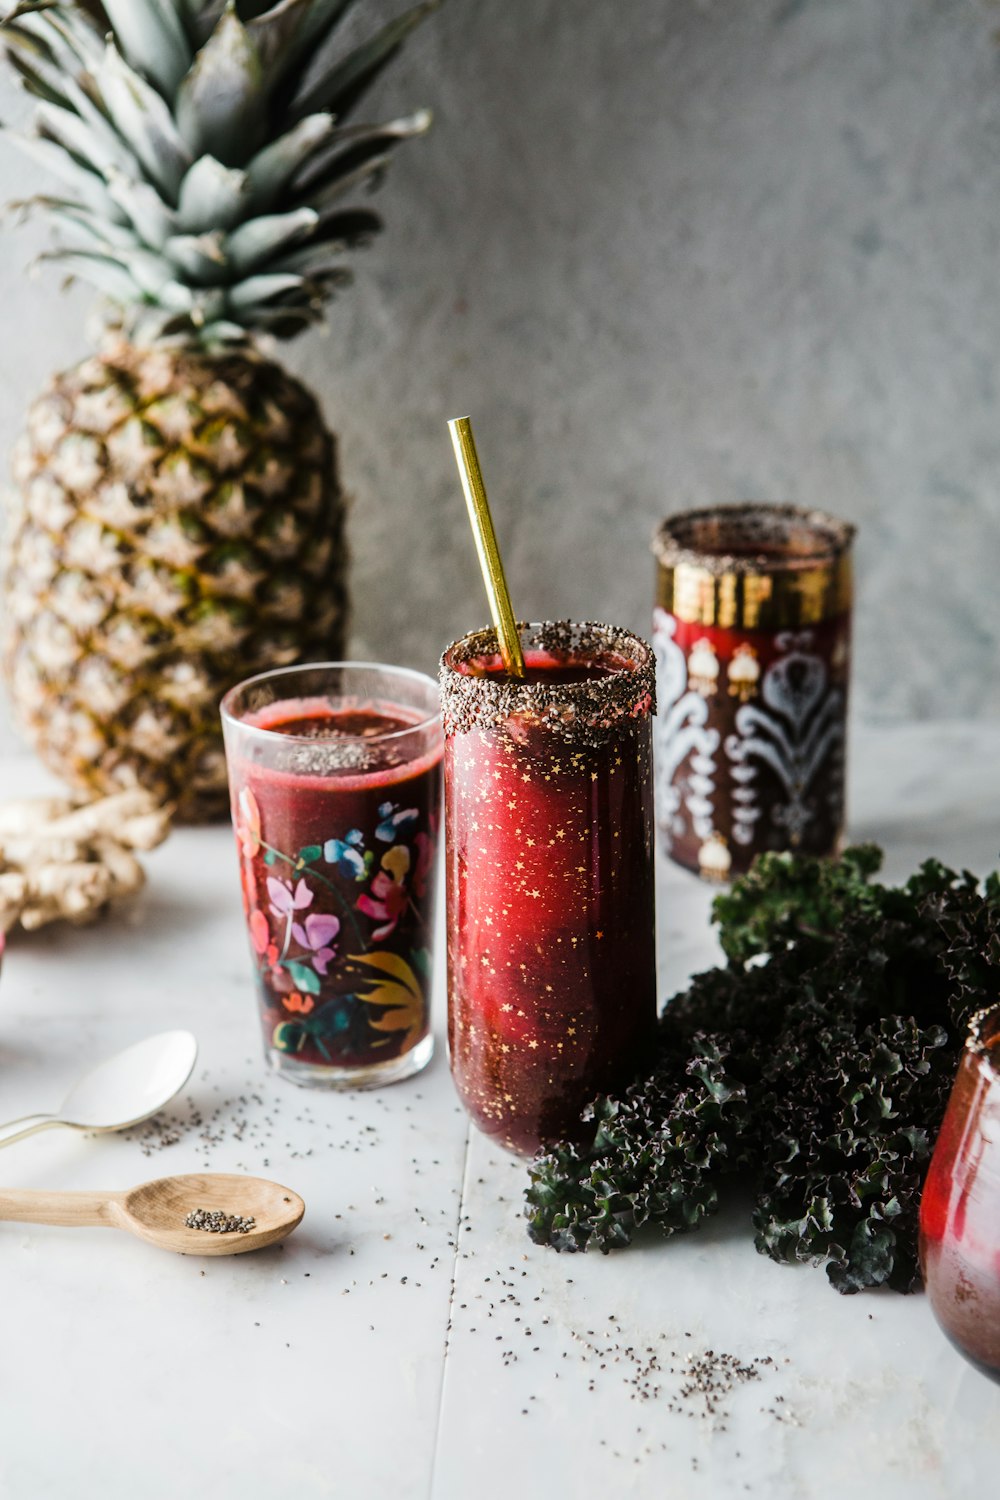 two drinking glass with red liquid near pineapple and green leaves